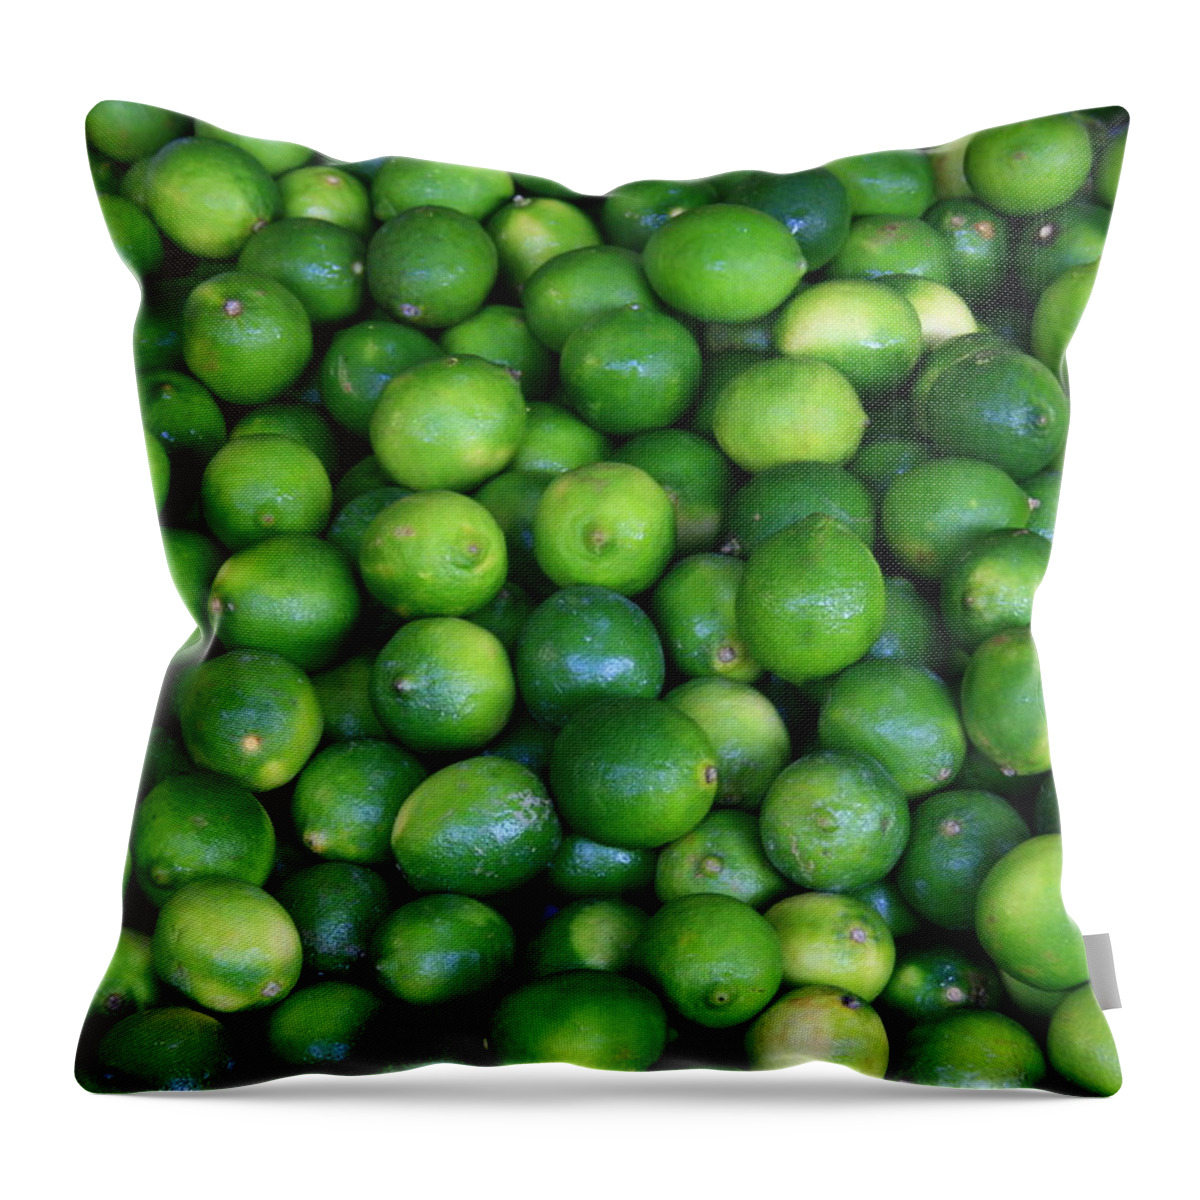 Lime Throw Pillow featuring the photograph Limes by David Dunham